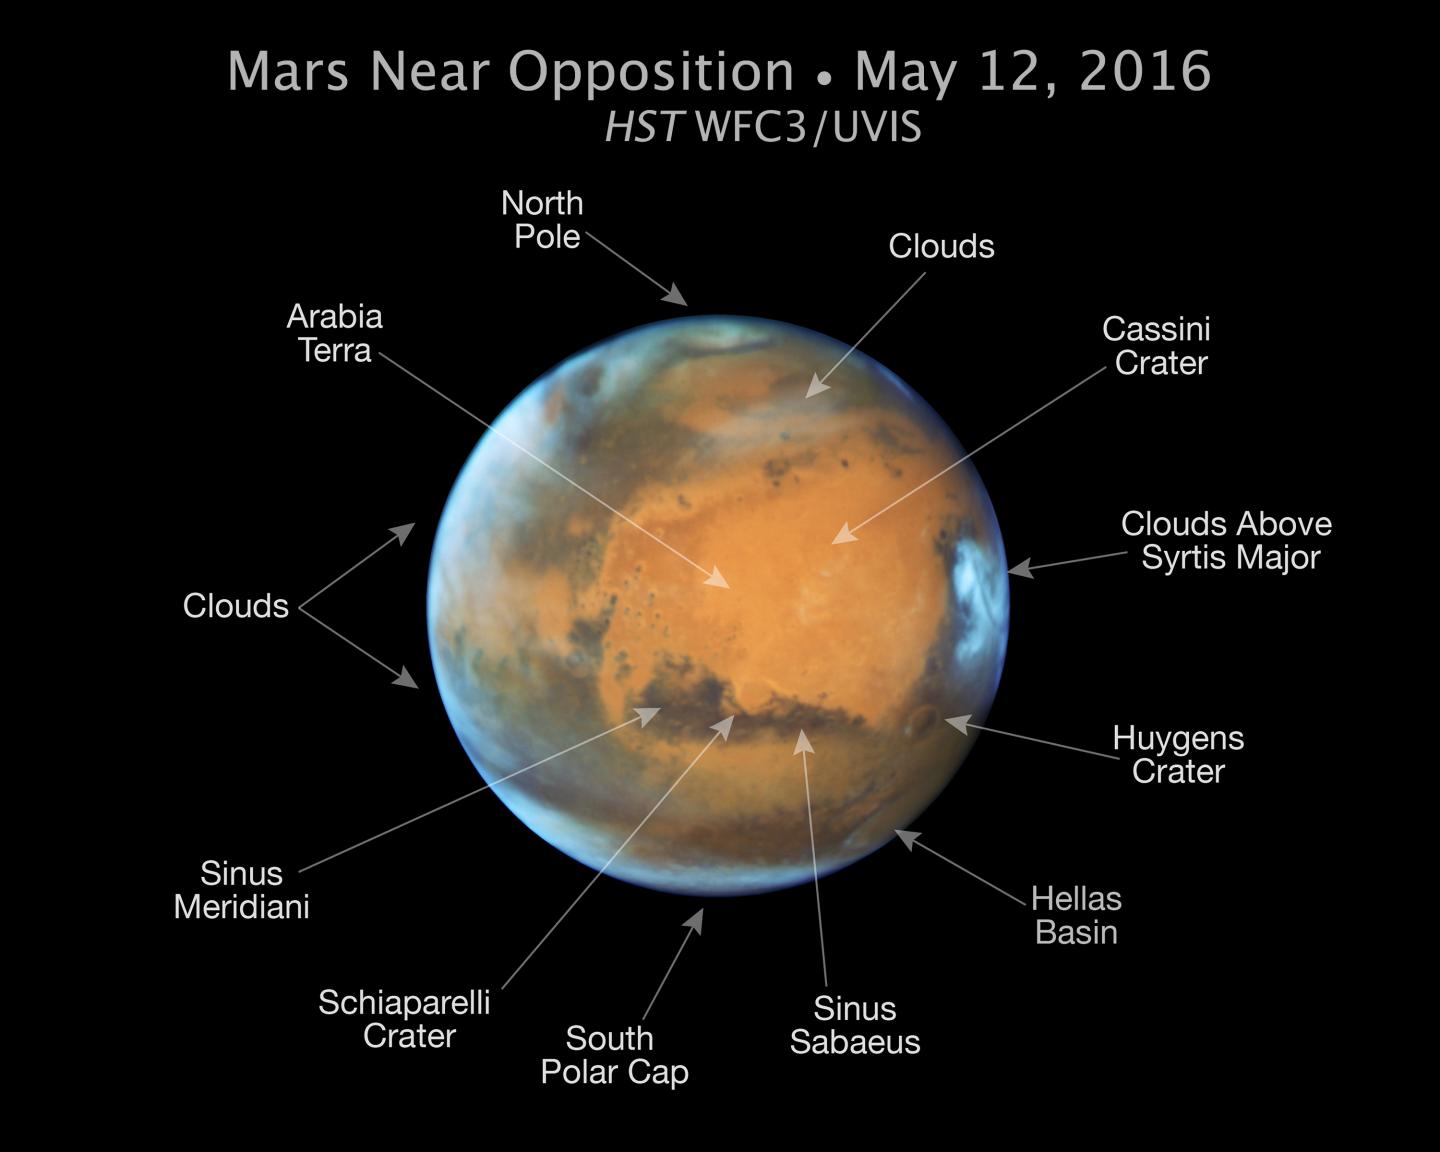 Major Features of Mars